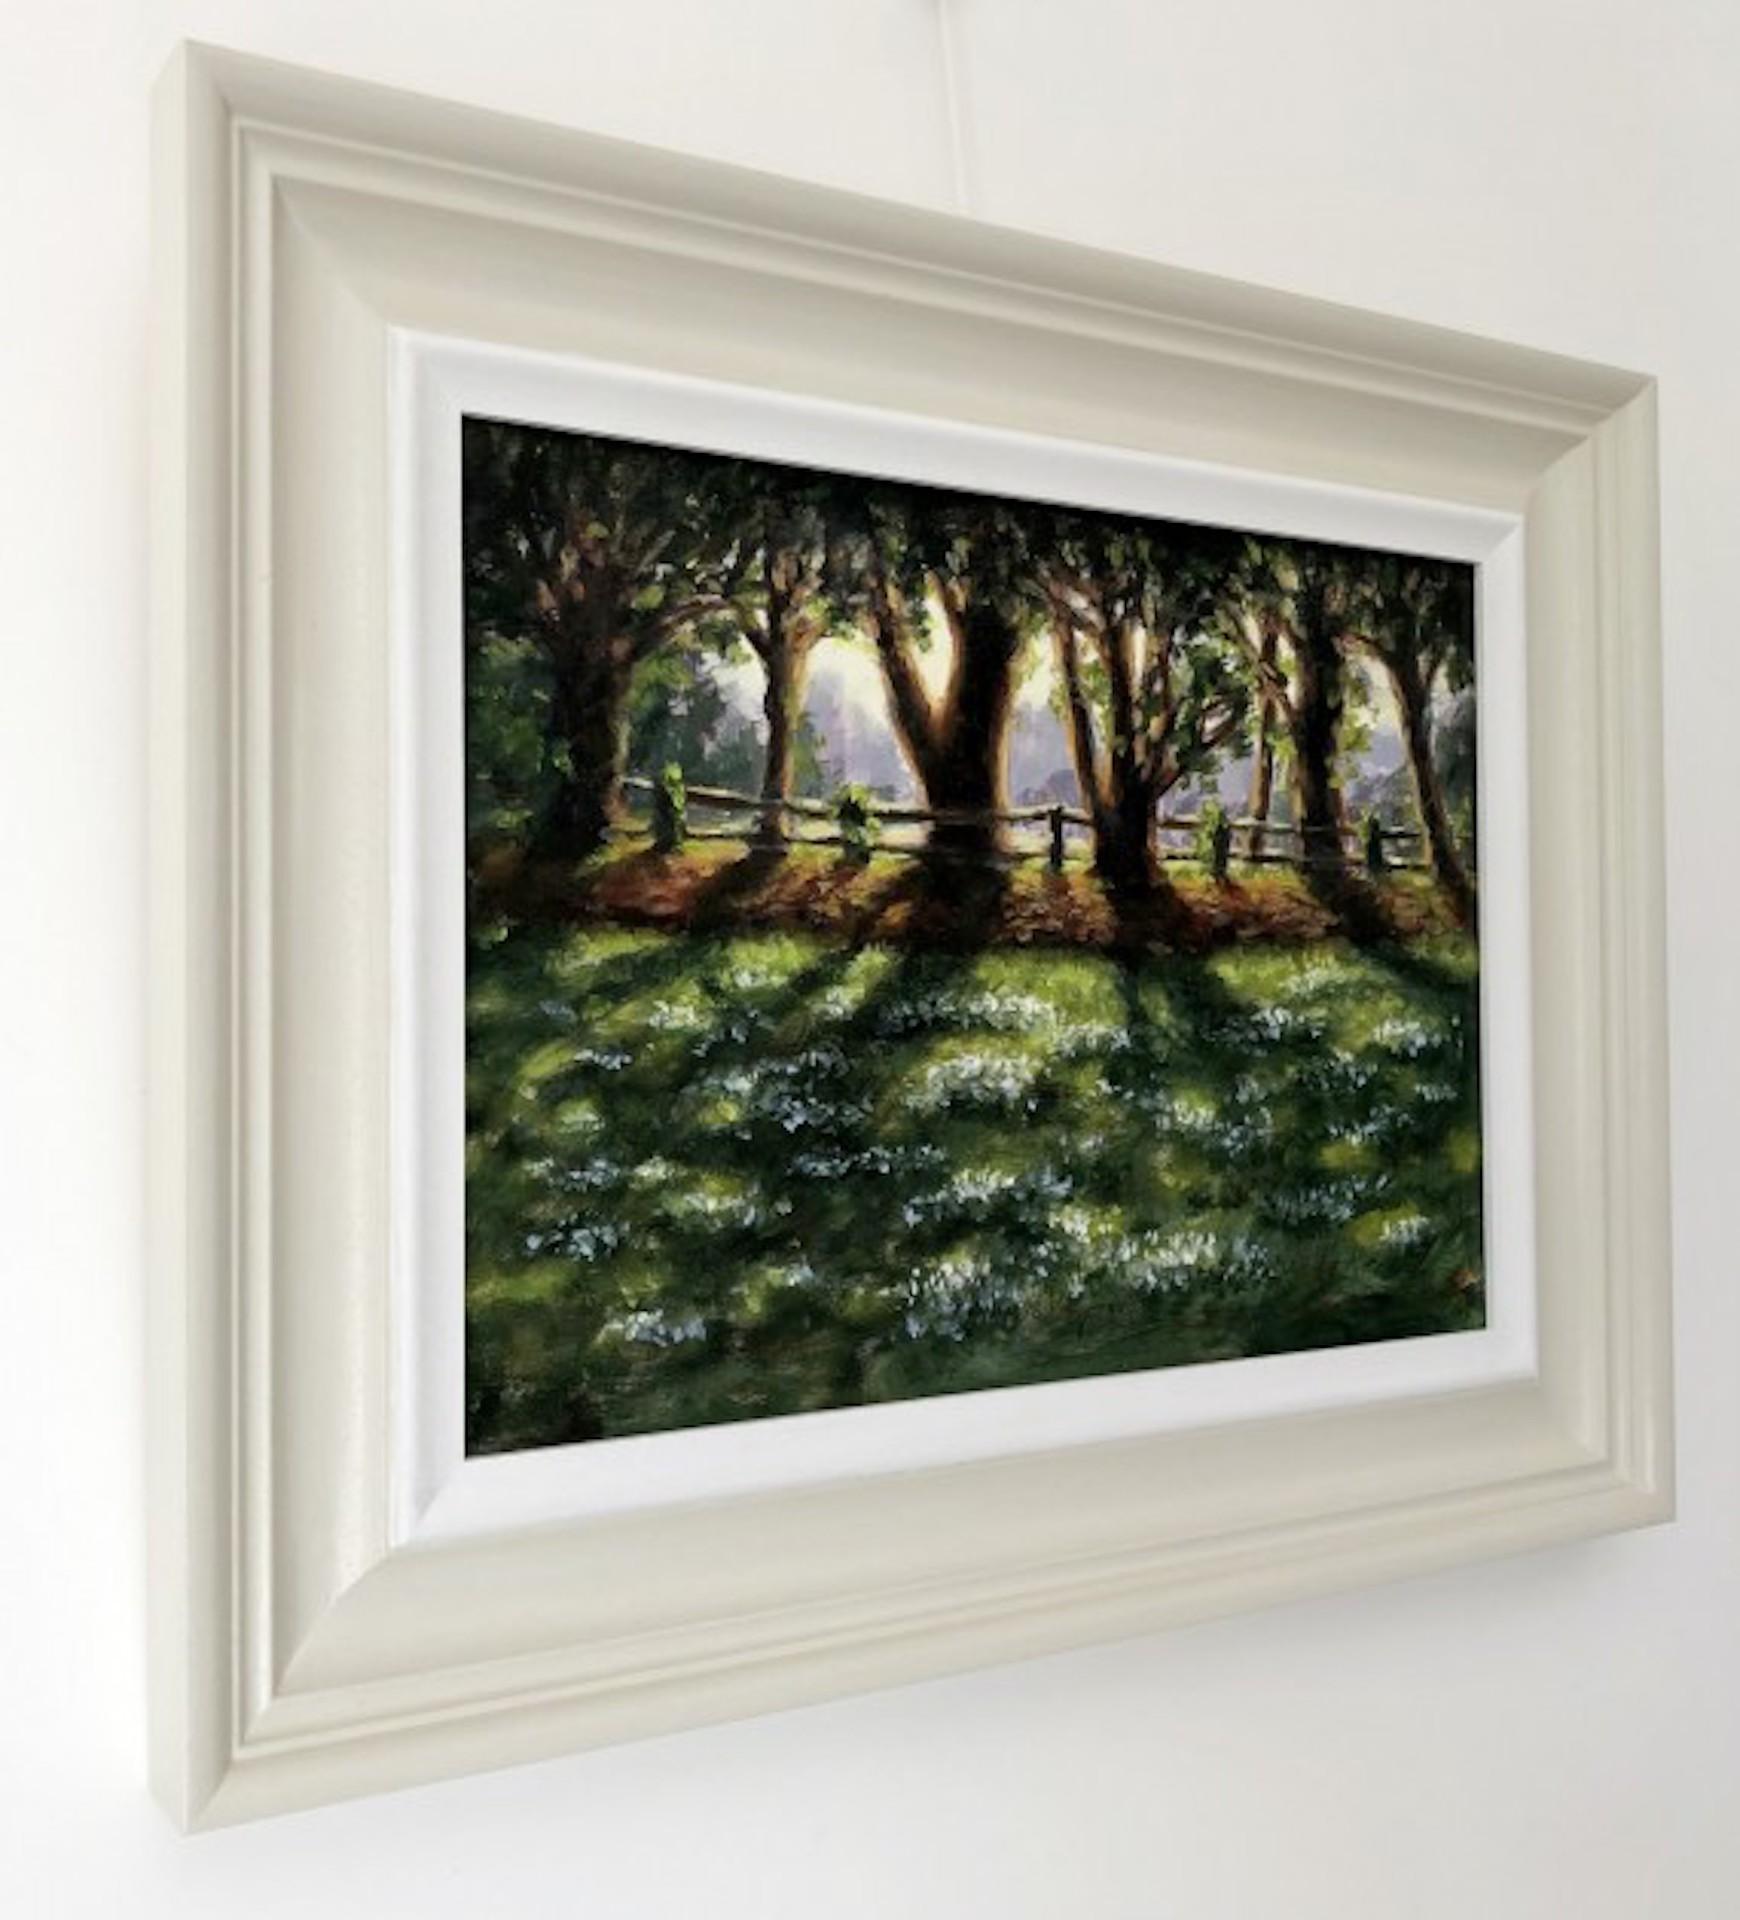 Marie Robinson's Sunlit Snowdrops, Swyncombe is an original oil painting of a carpet of snowdrops catching the late afternoon Winter sun through a row of yew trees. The location is by the Saxon church at Swyncombe in the Chilterns which is so well